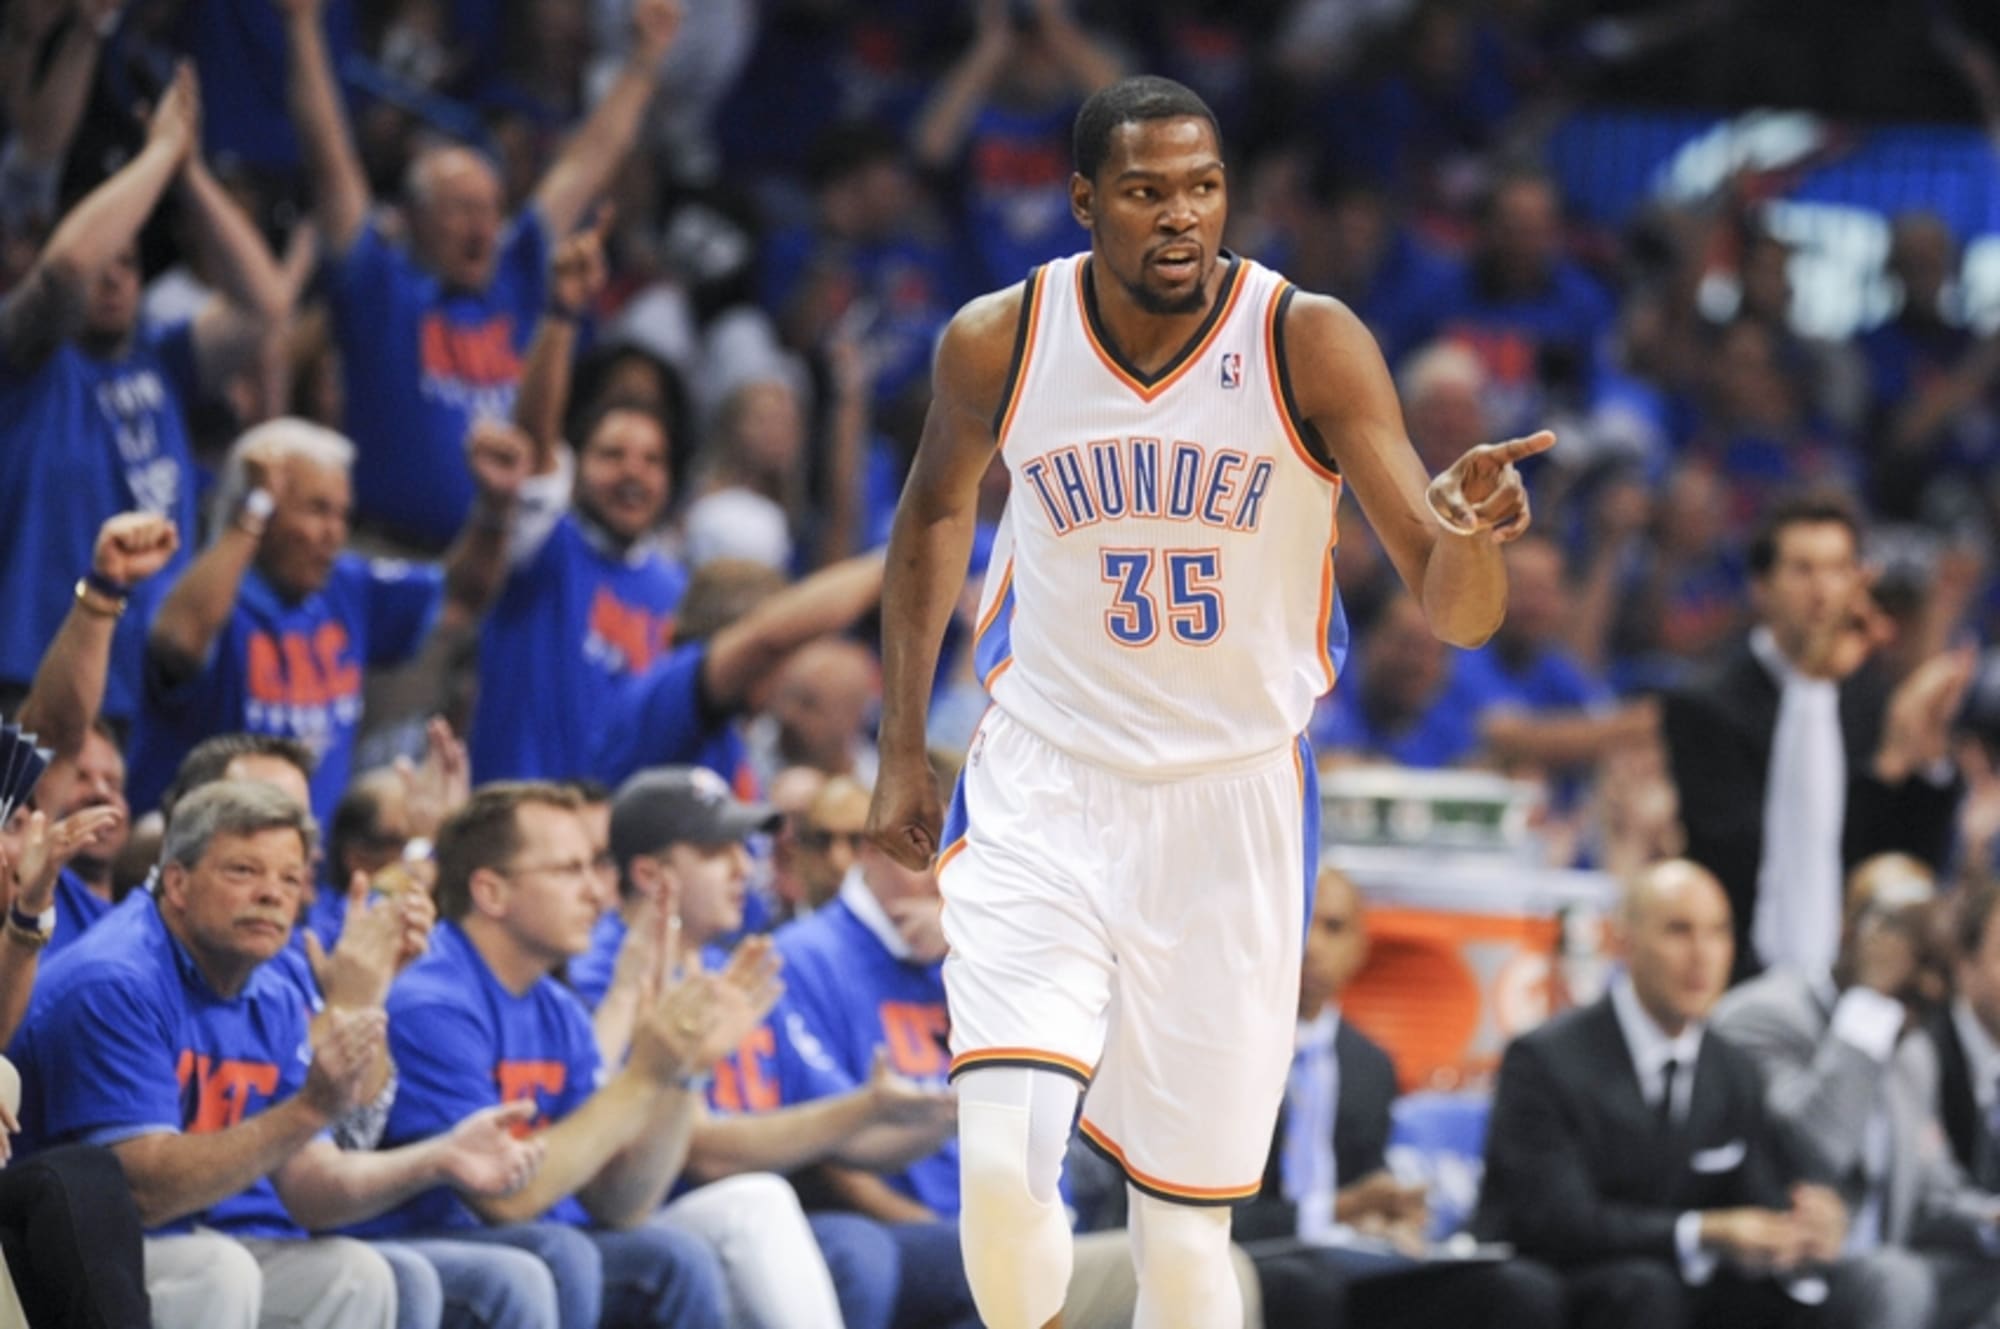 Thunder star Kevin Durant makes some noise in Boston - The Boston